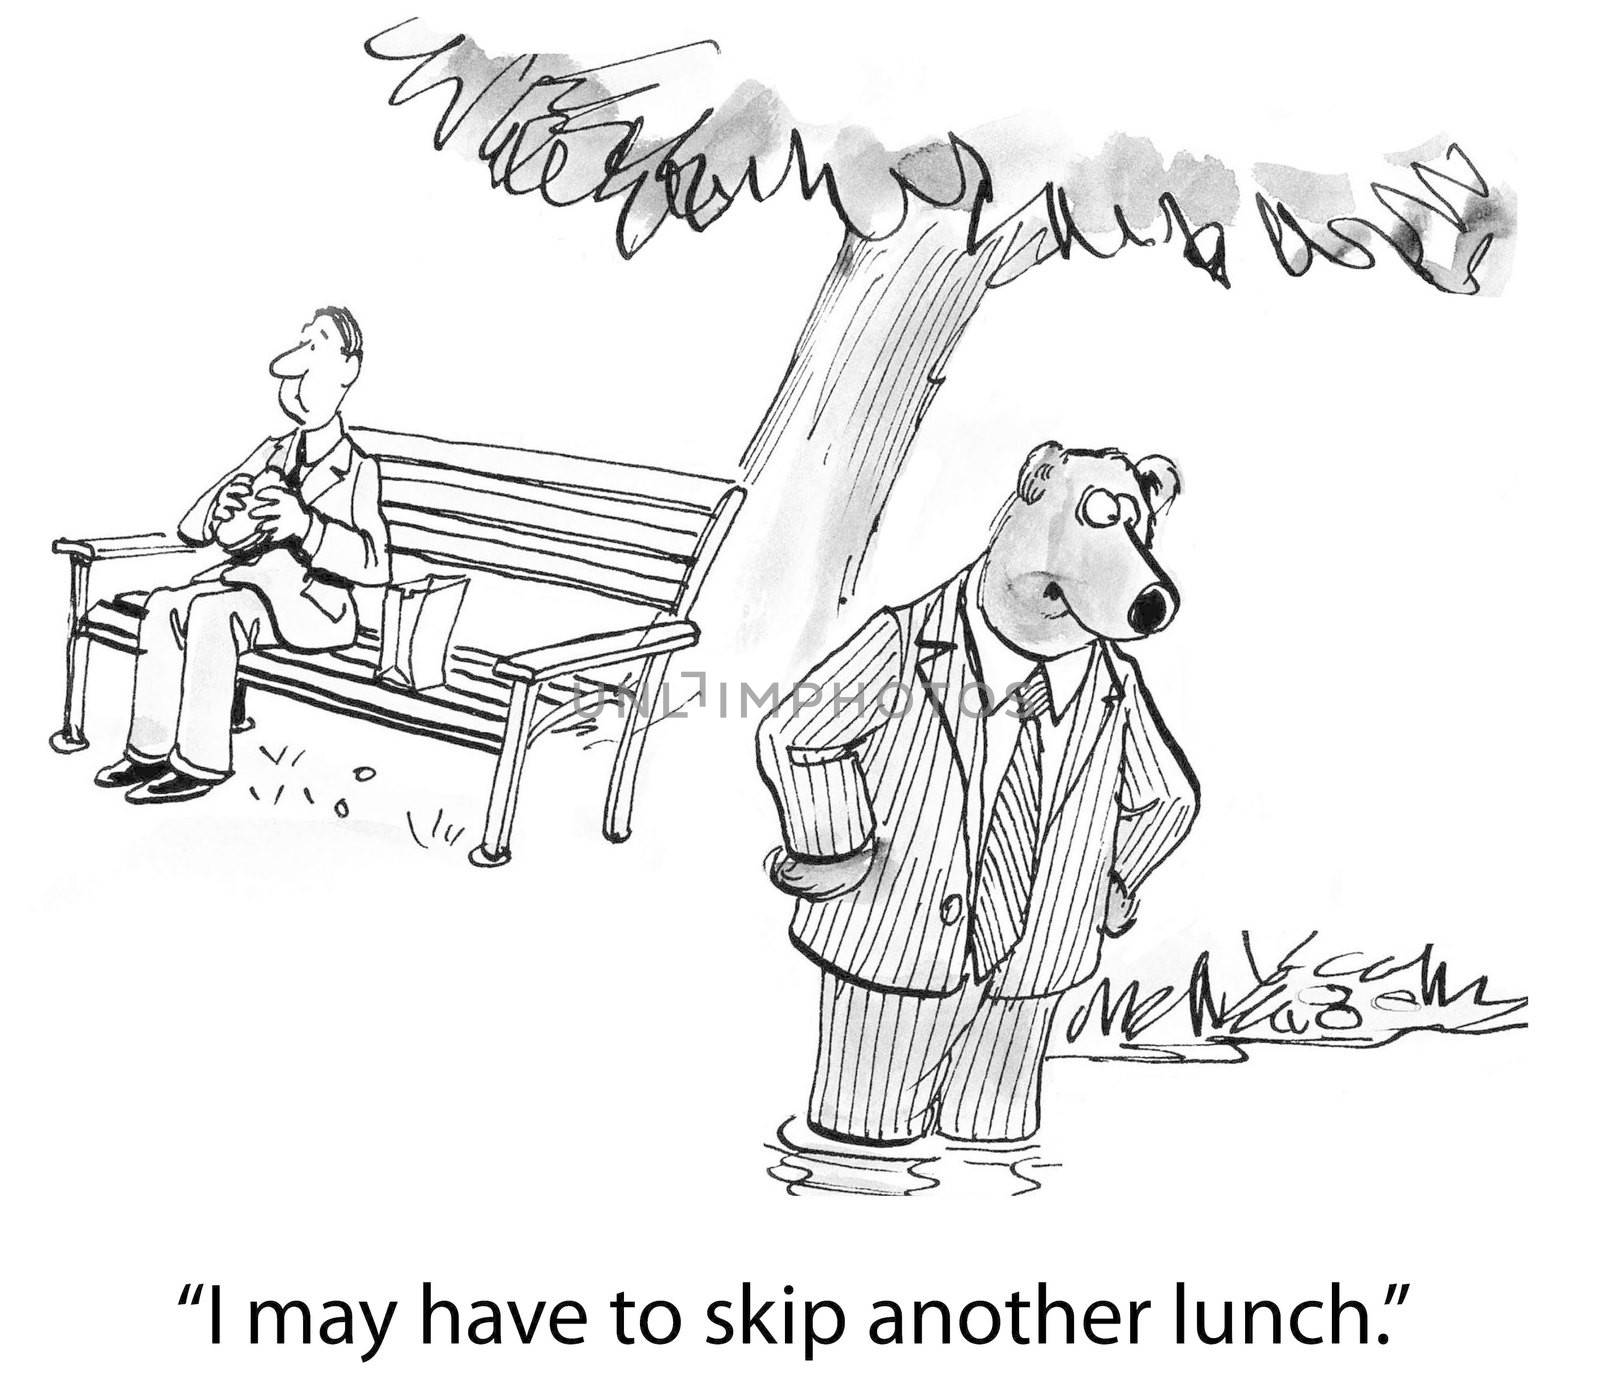 "I may have to skip another lunch."